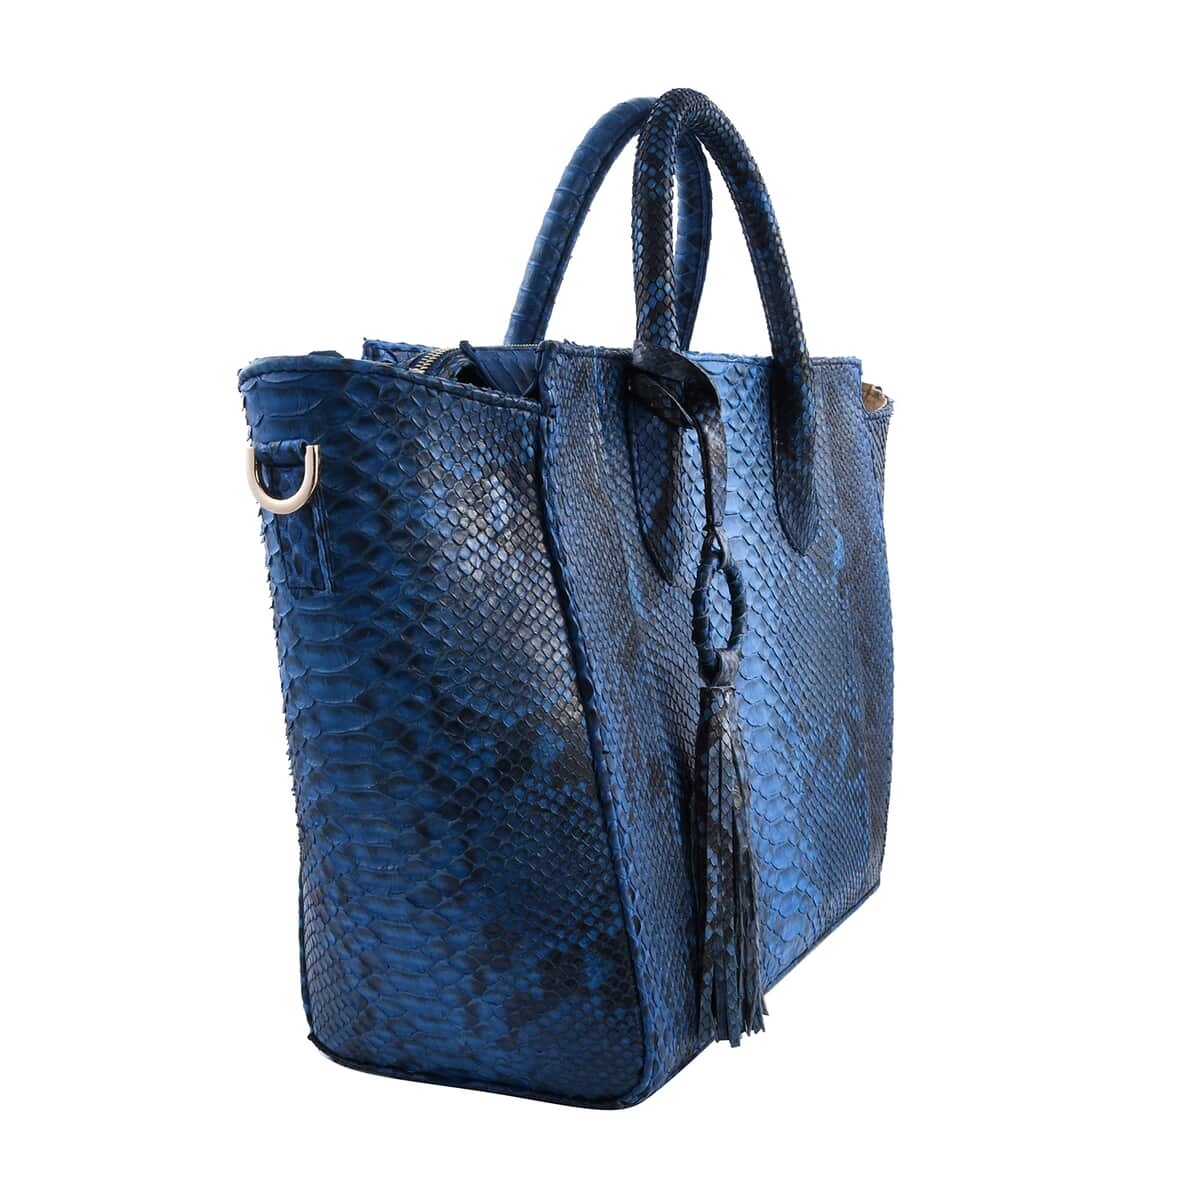 The Grand Pelle Handcrafted Blue Color 100 % Genuine Python Leather Tote Bag (12.2"x10.84"x5.51") image number 3